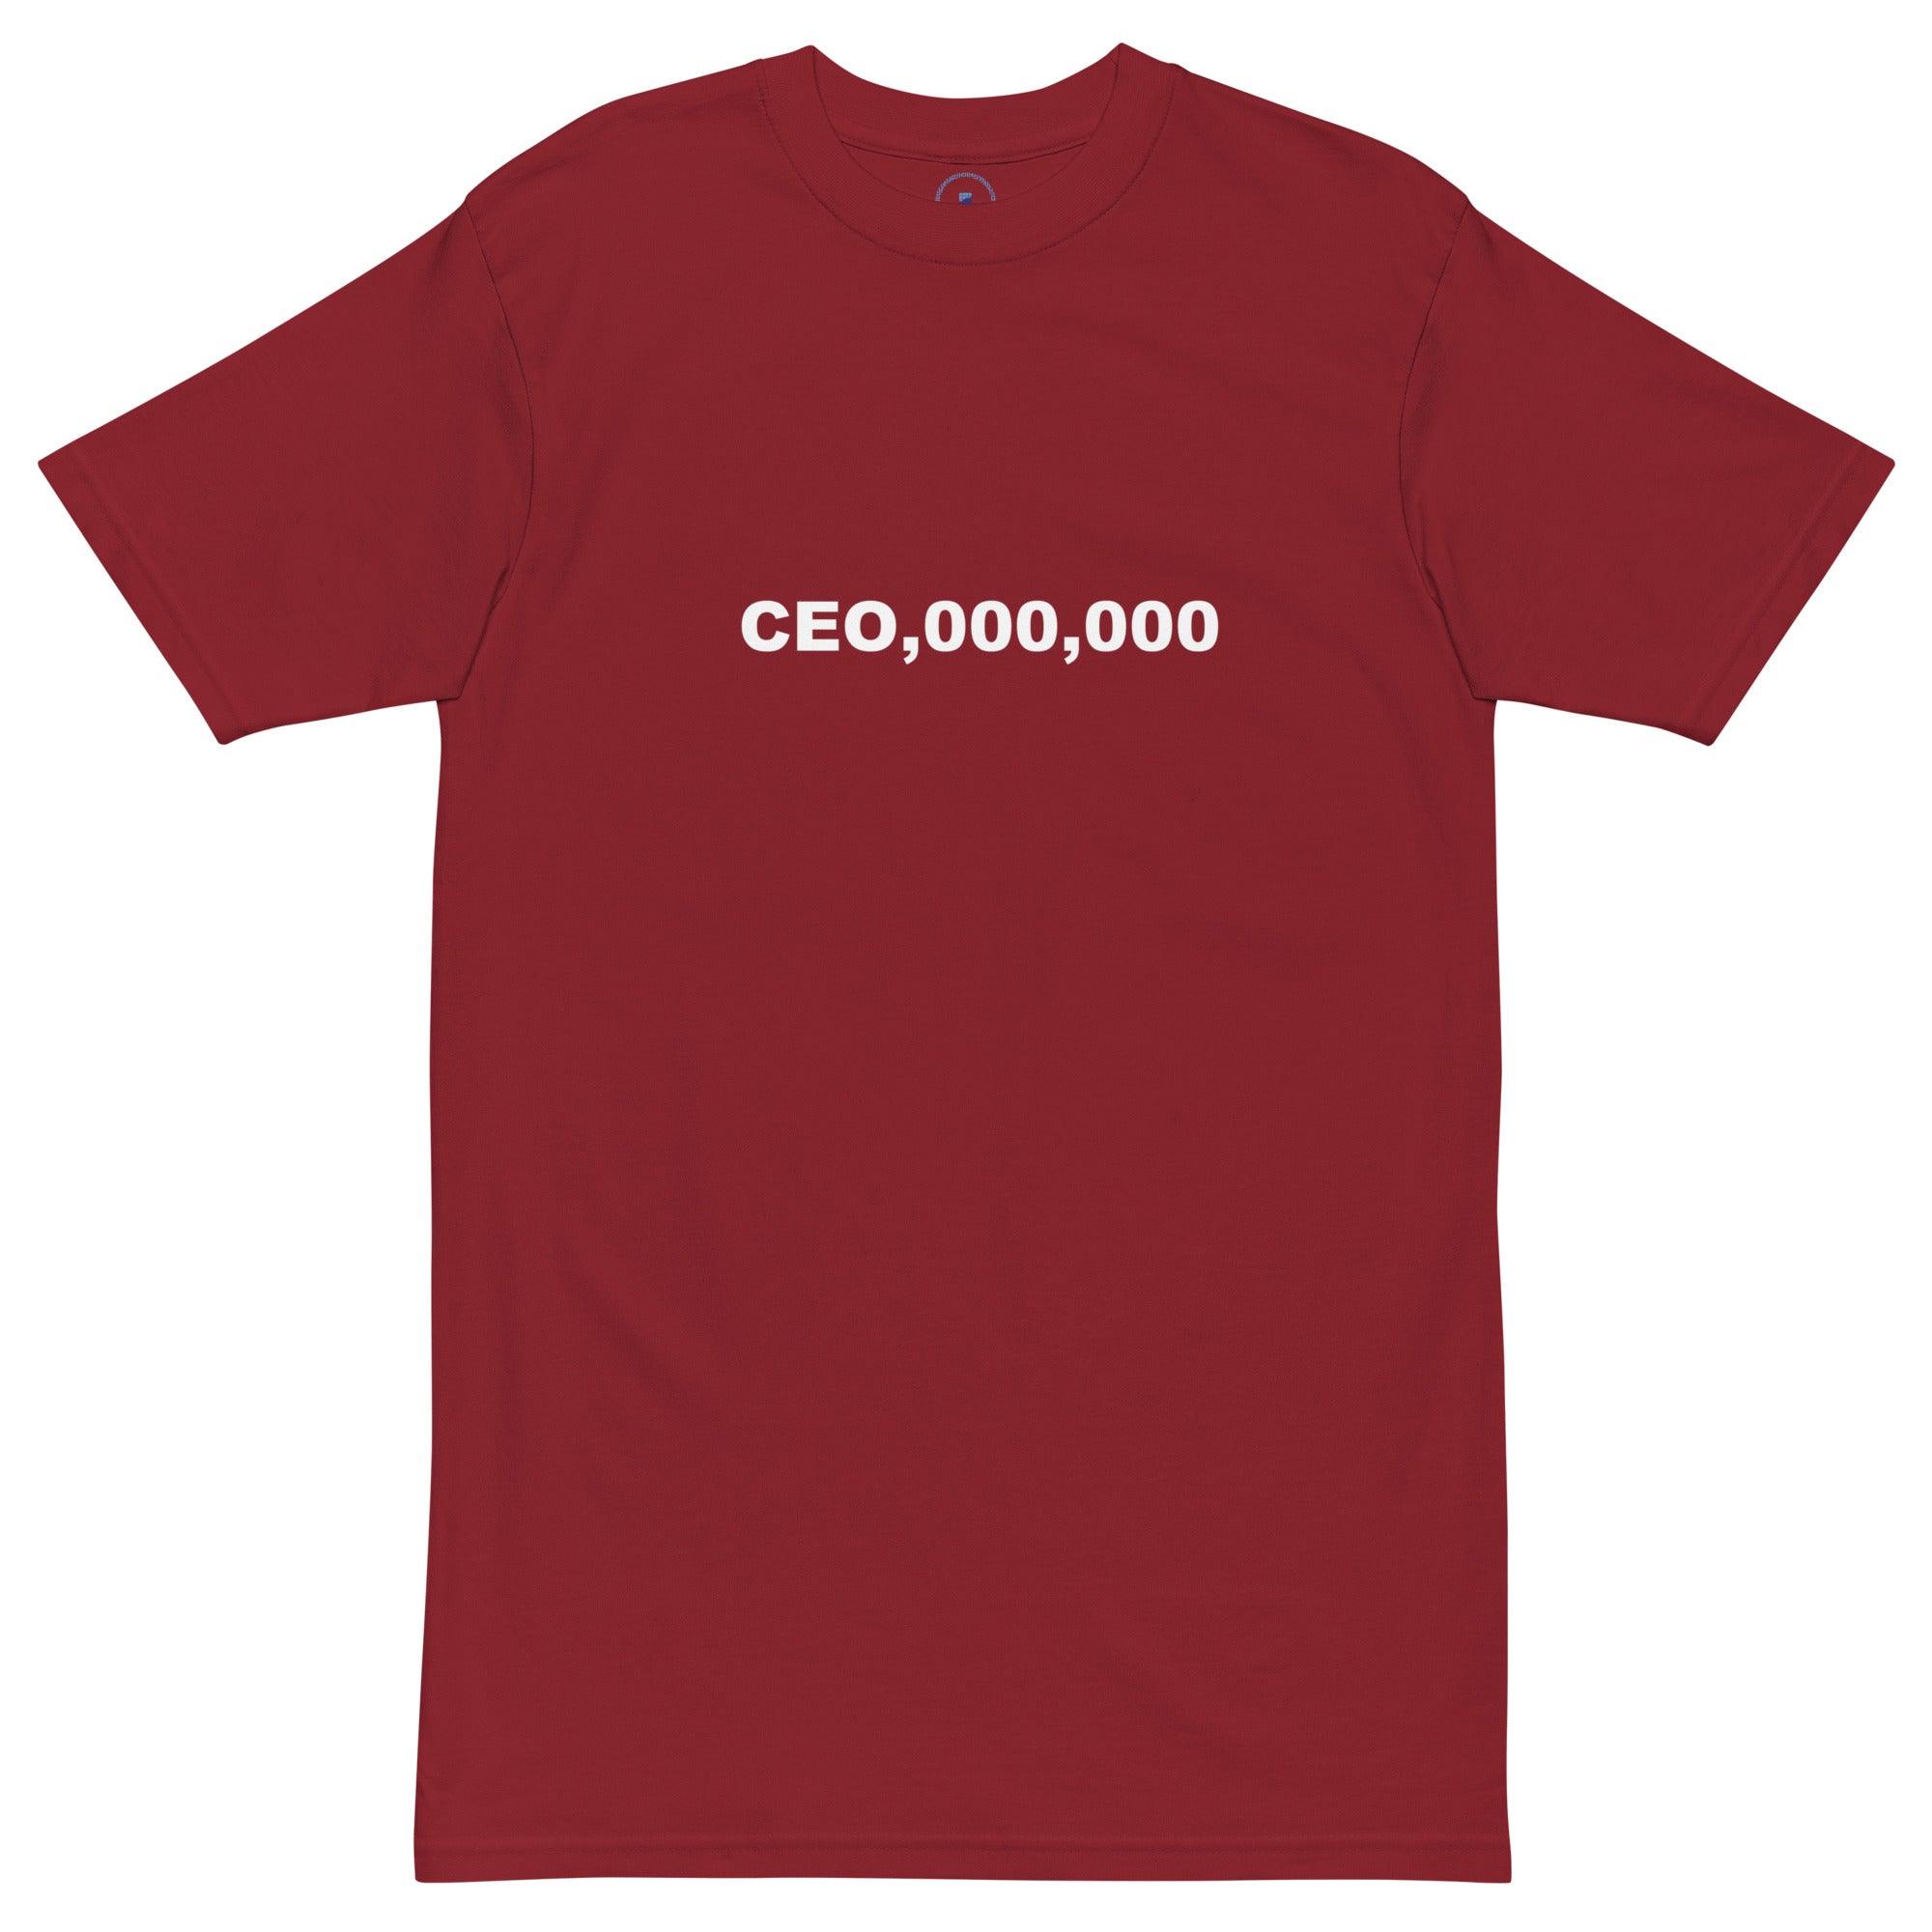 CEO,000,000-BLACK T-Shirt - InvestmenTees